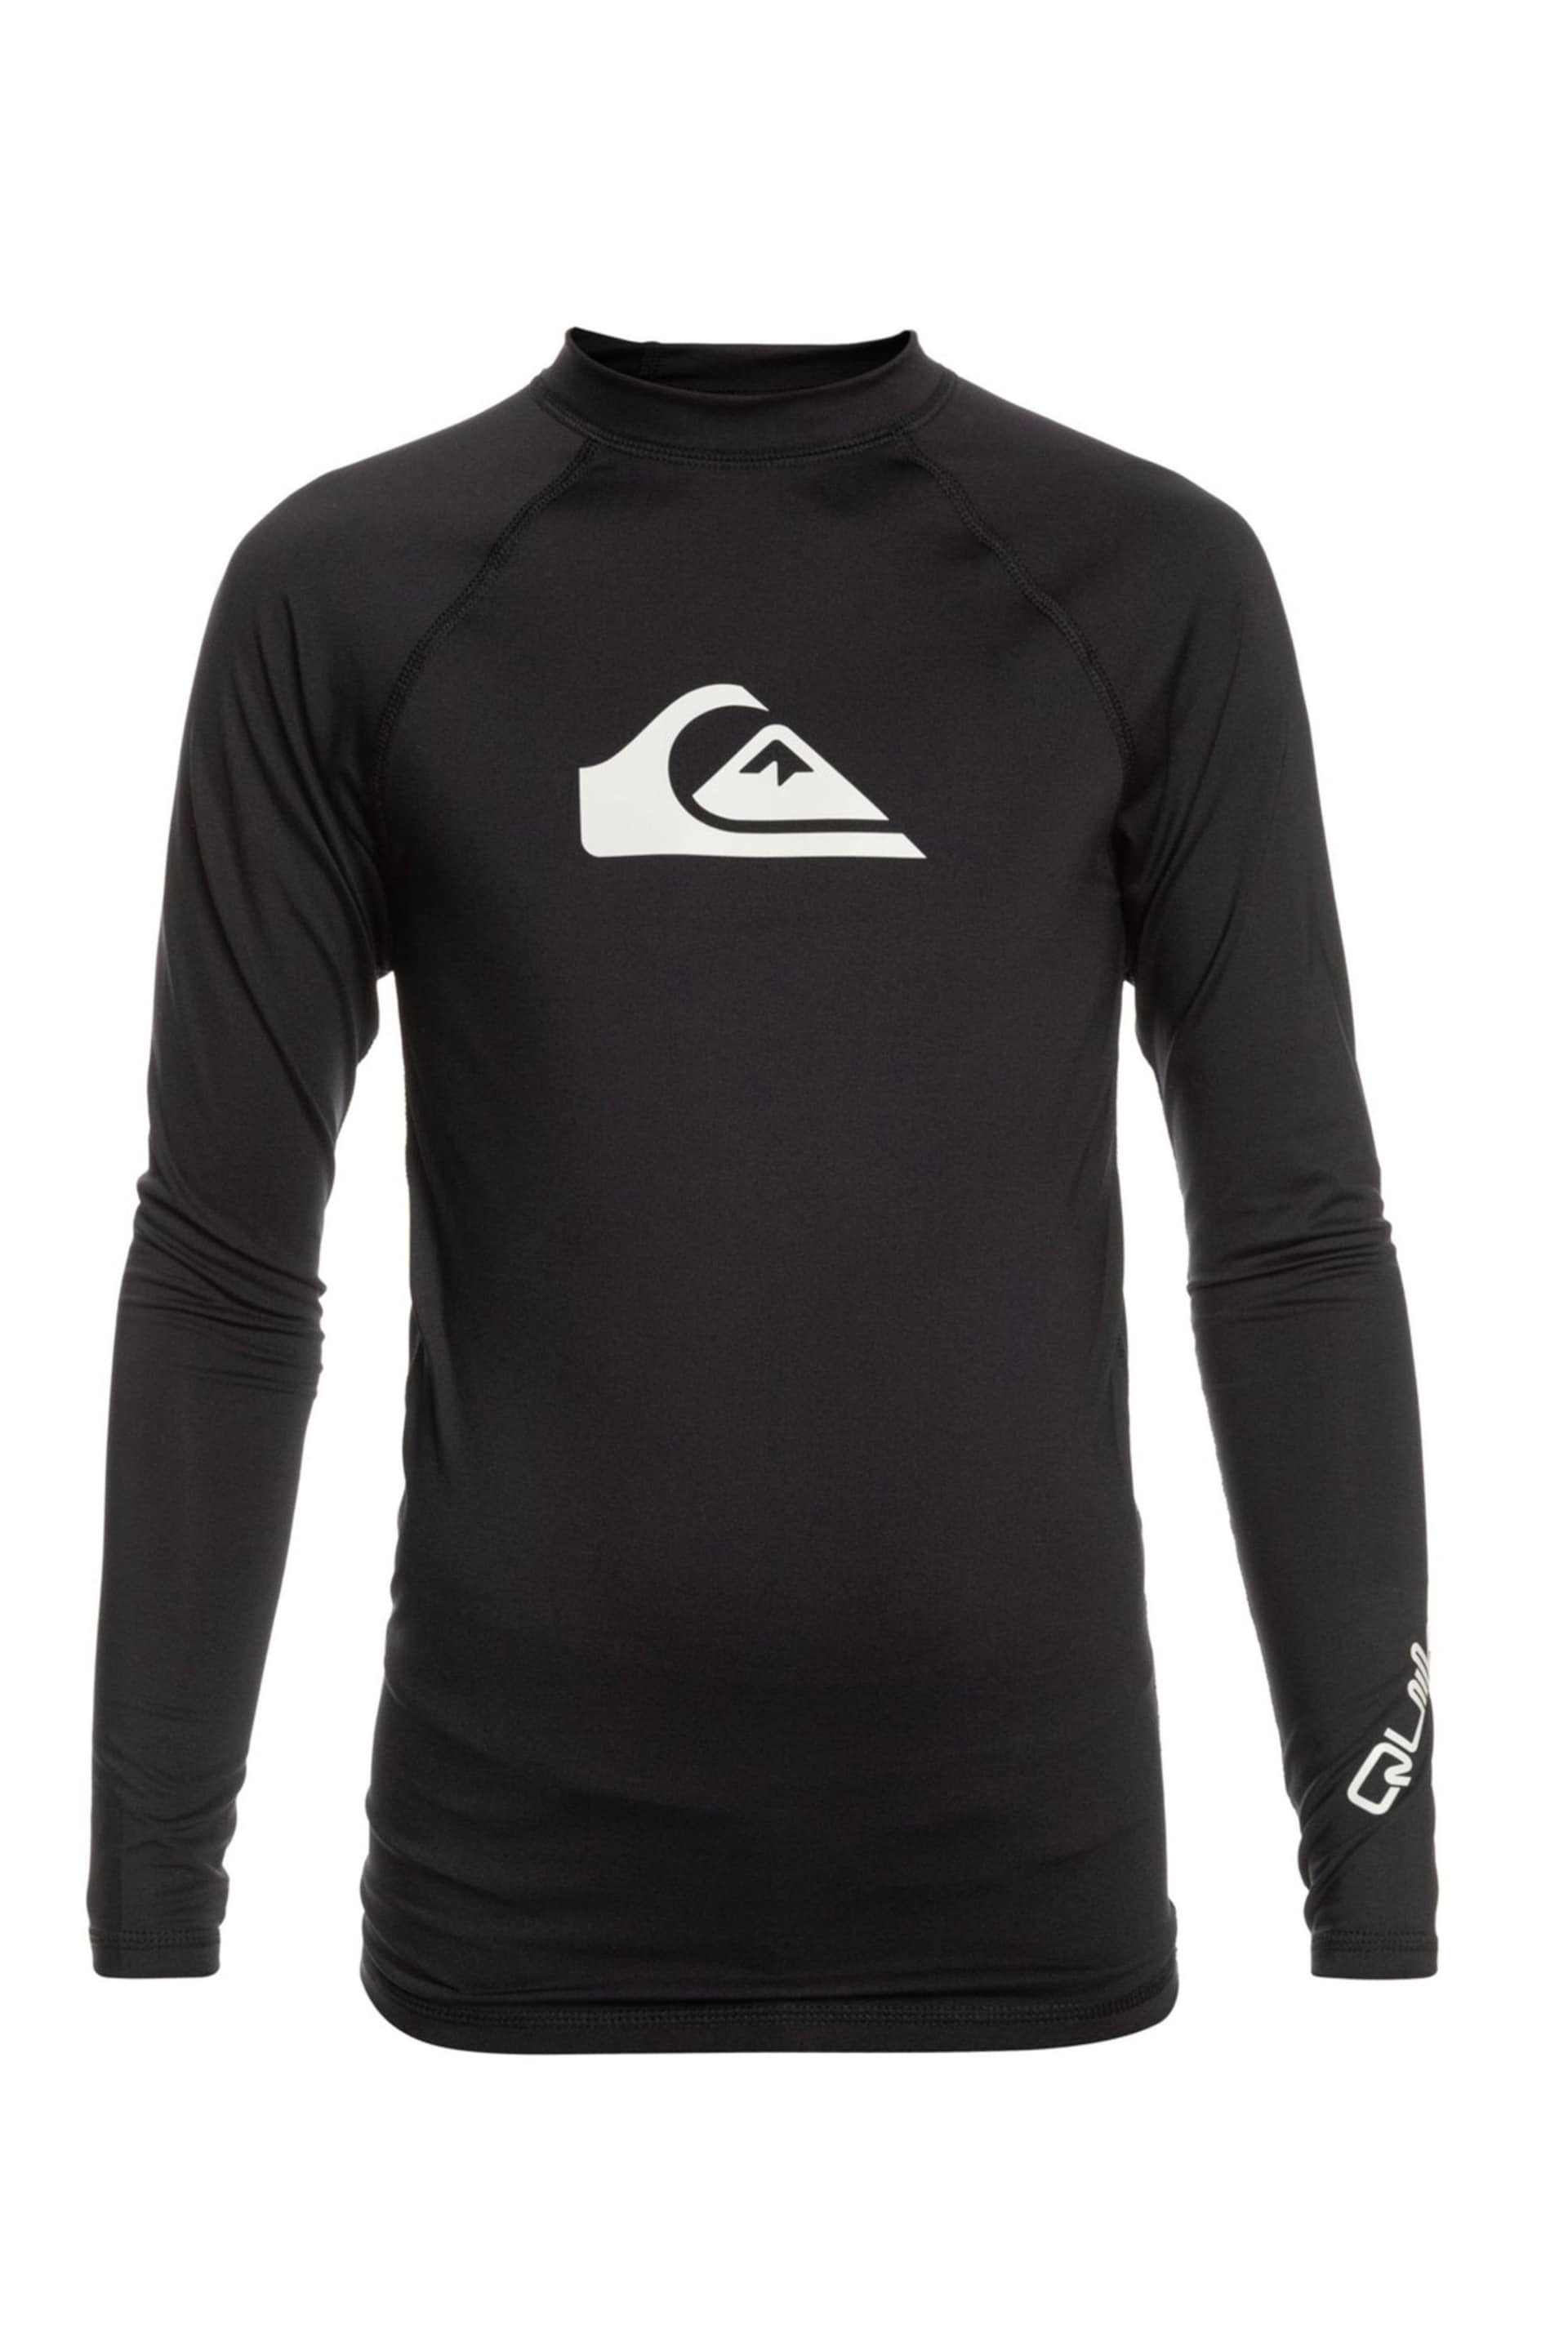 Quiksilver All Time Long Sleeves Rash Vest - Image 1 of 2